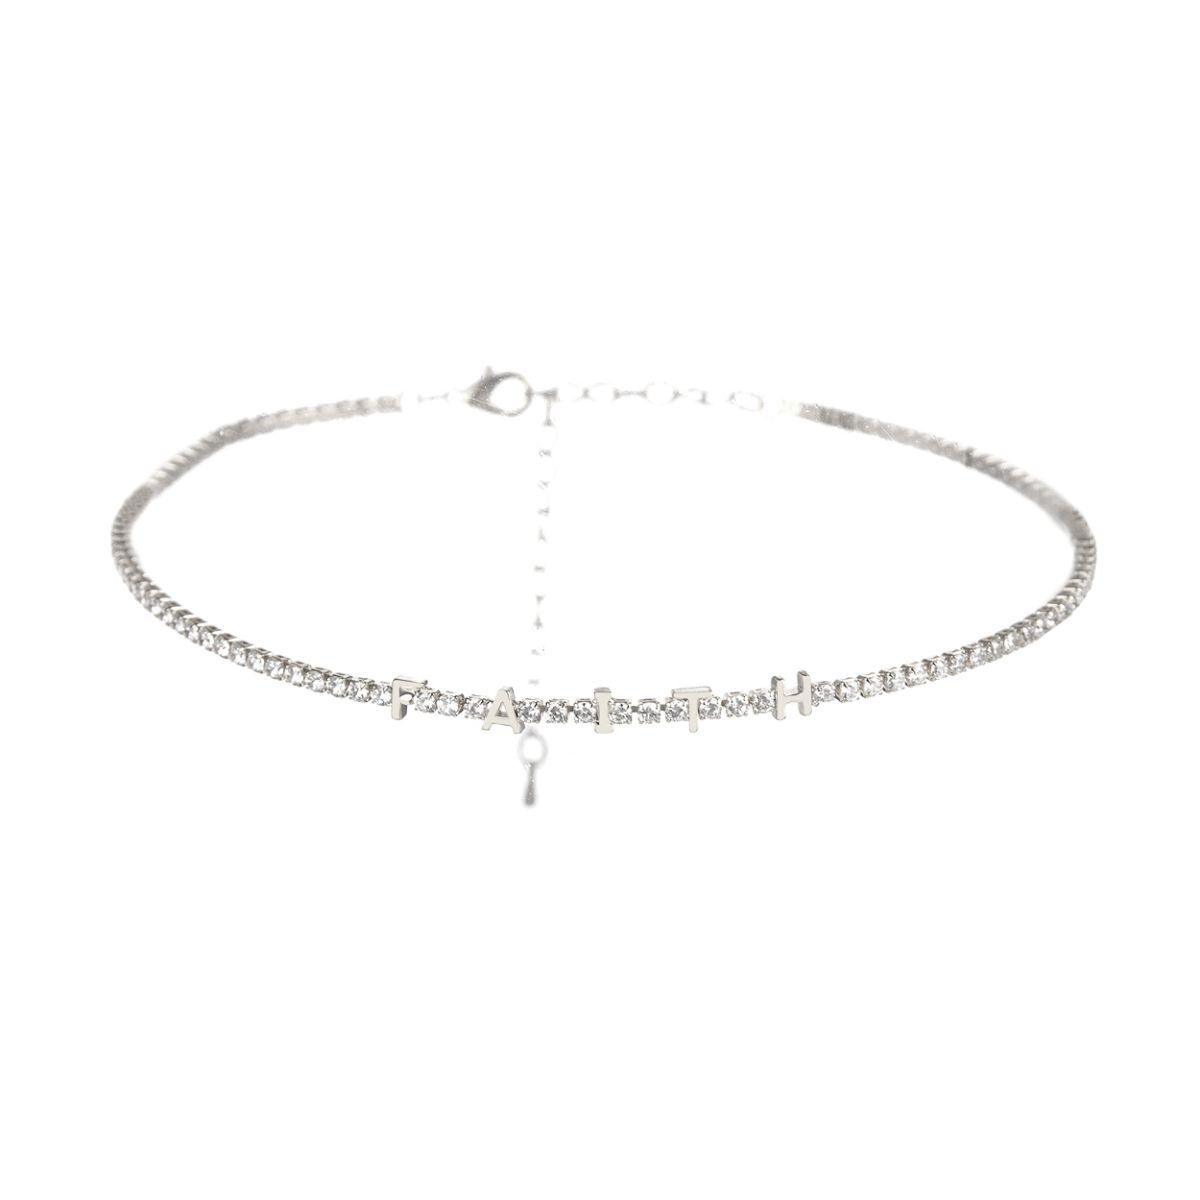 Silver Plated CZ Tennis Choker Necklace Faith Letters